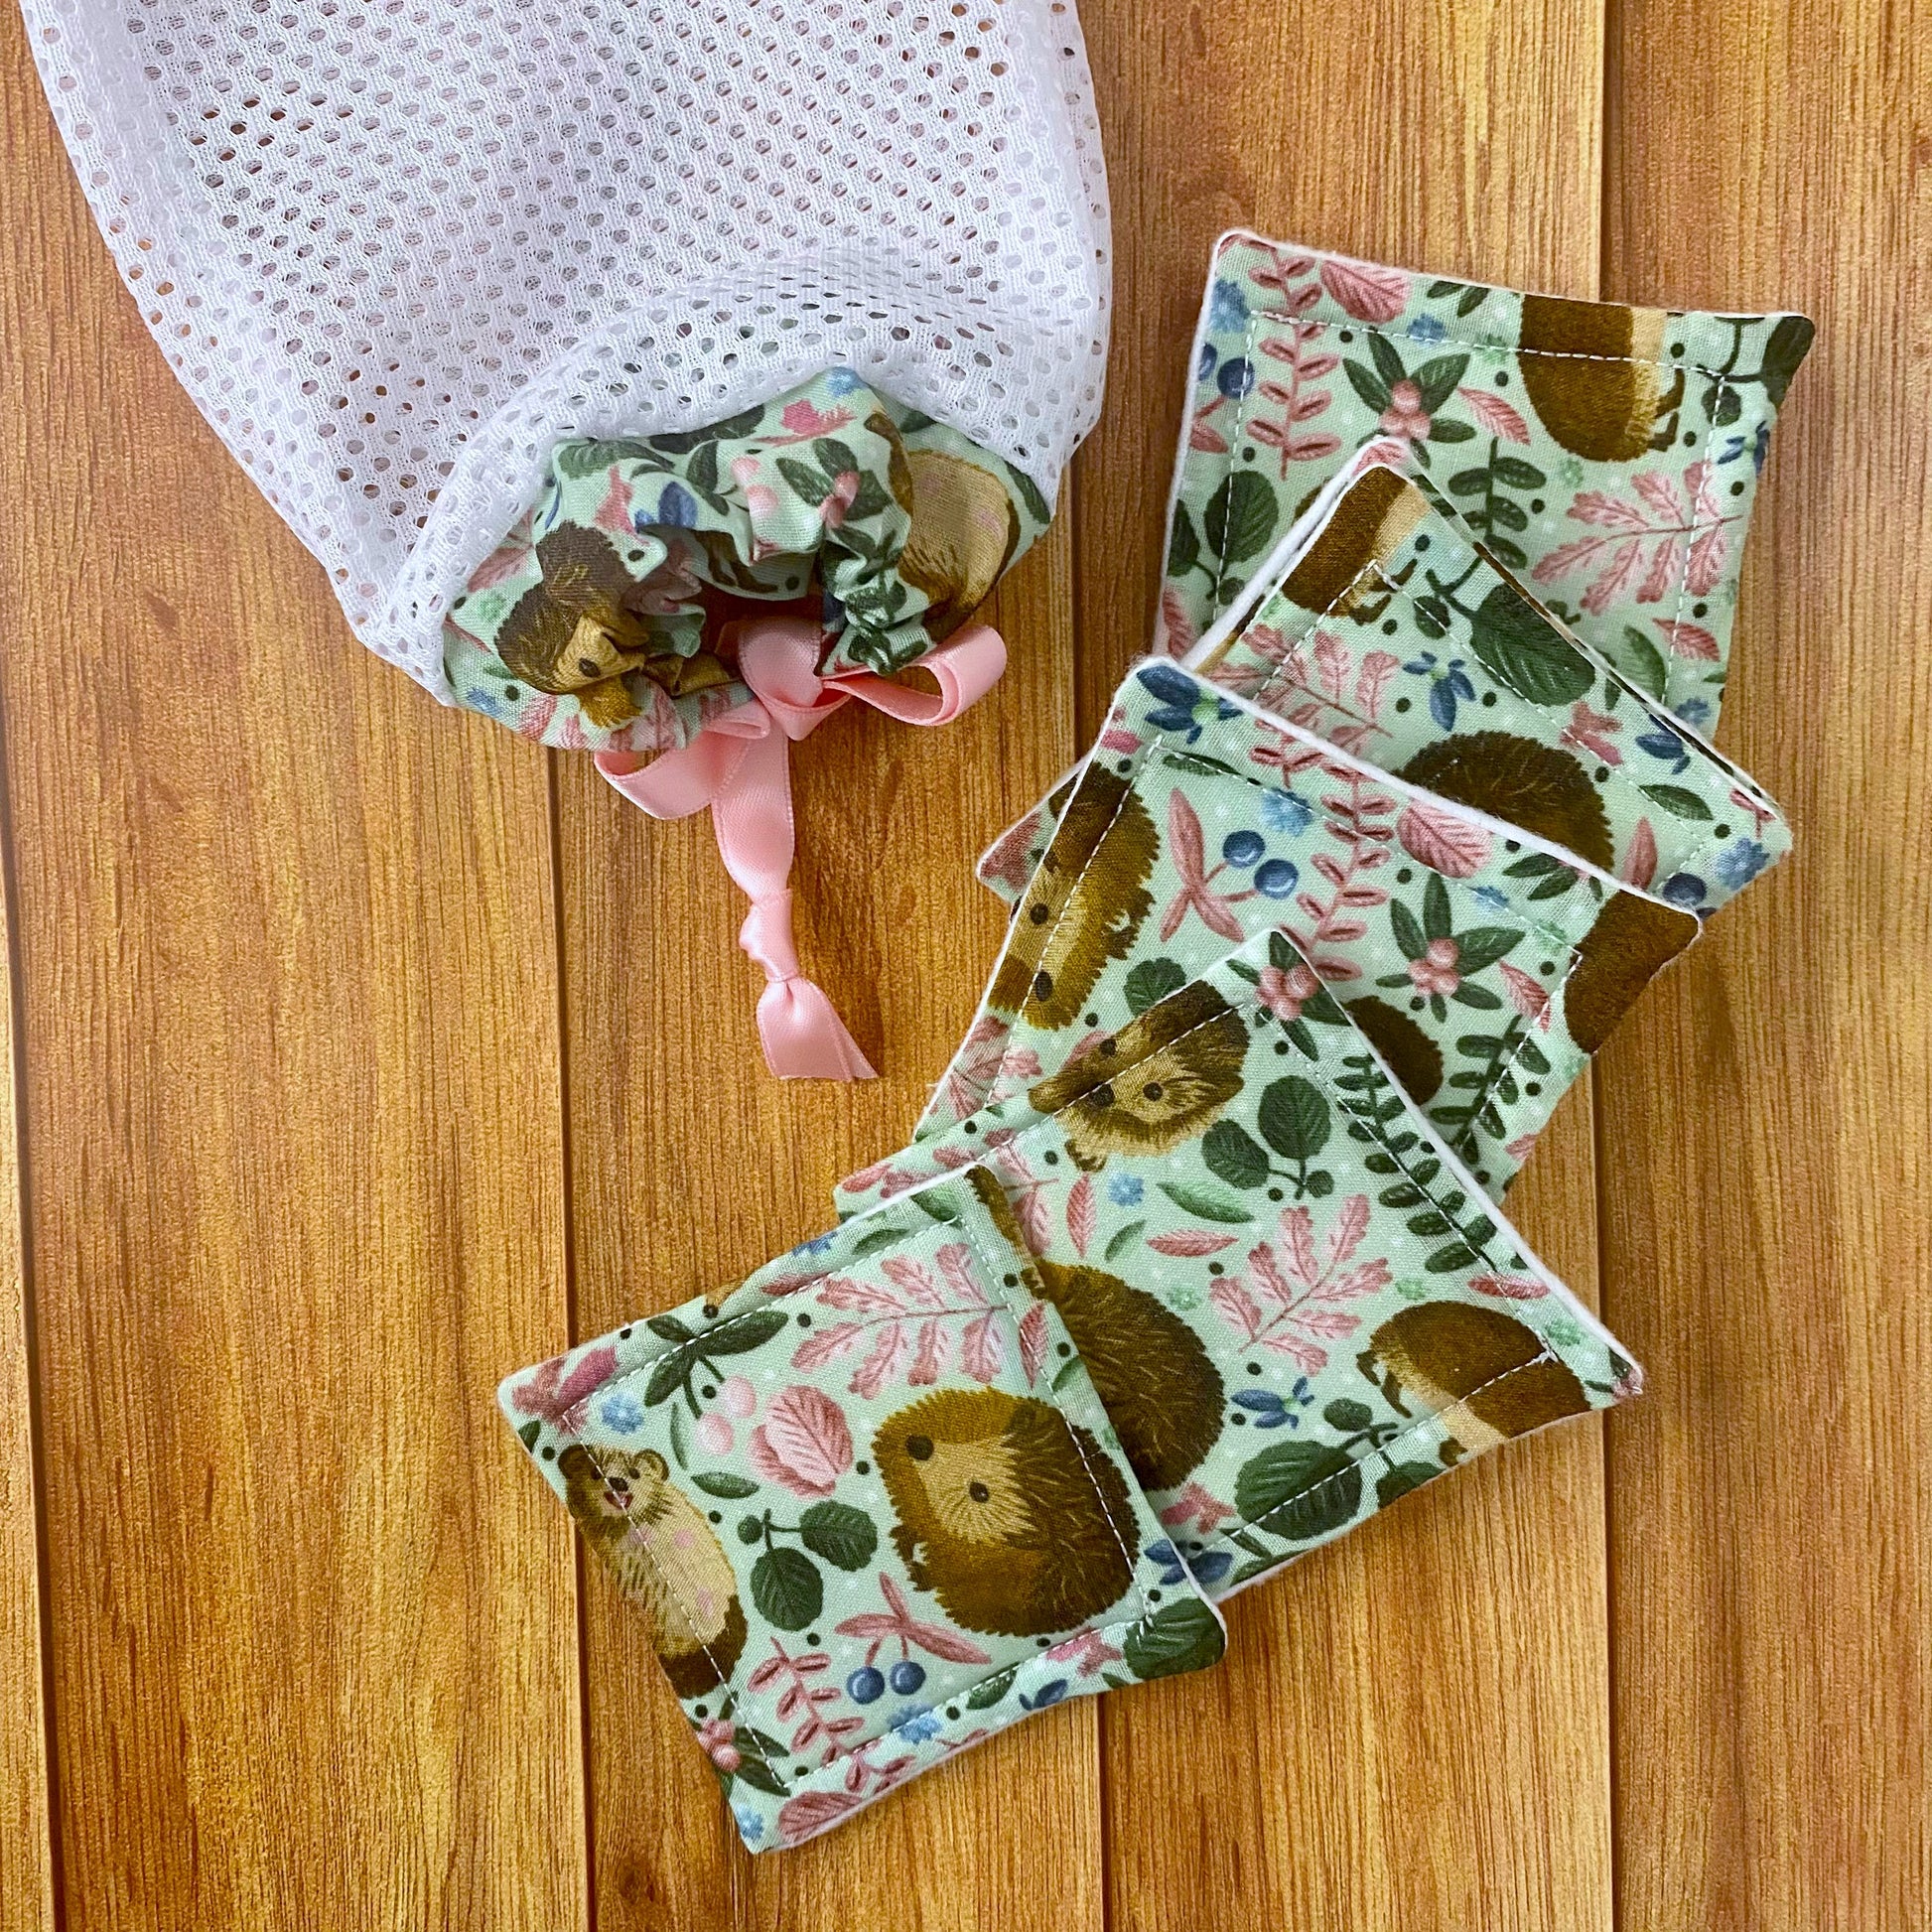 reusable skincare pads and washbag on wooden surface